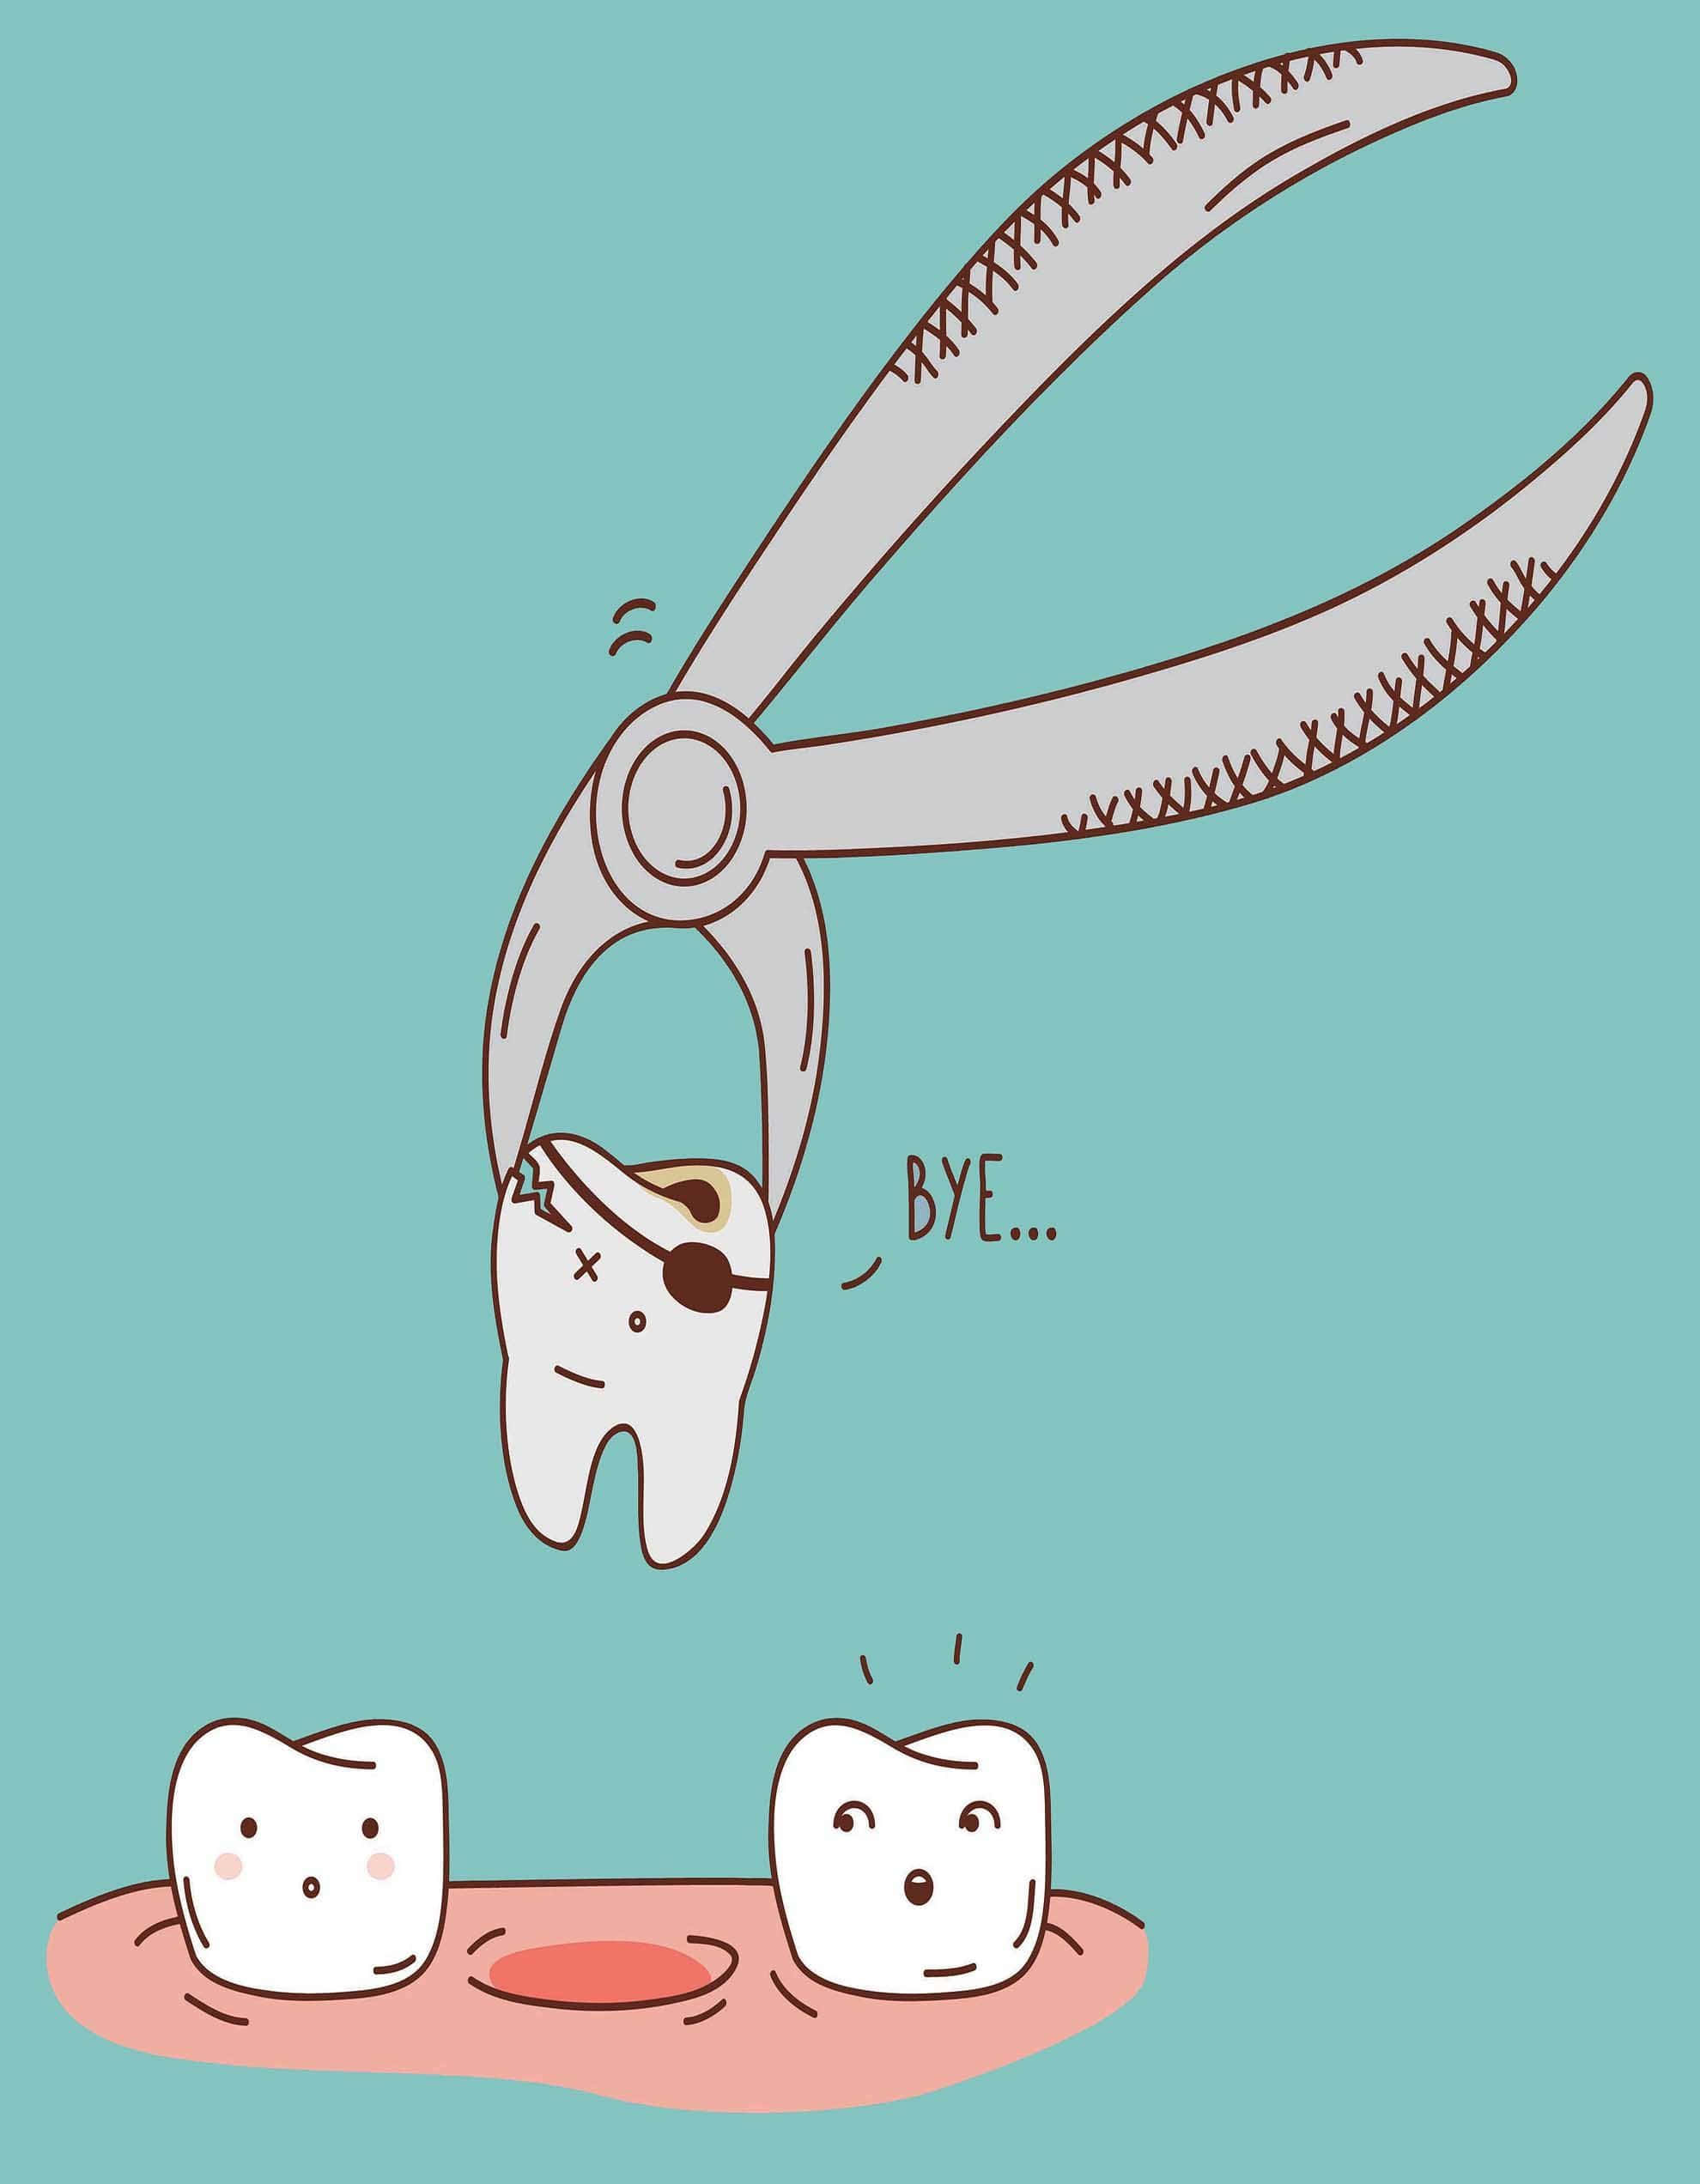 Don't forget to take care of your teeth